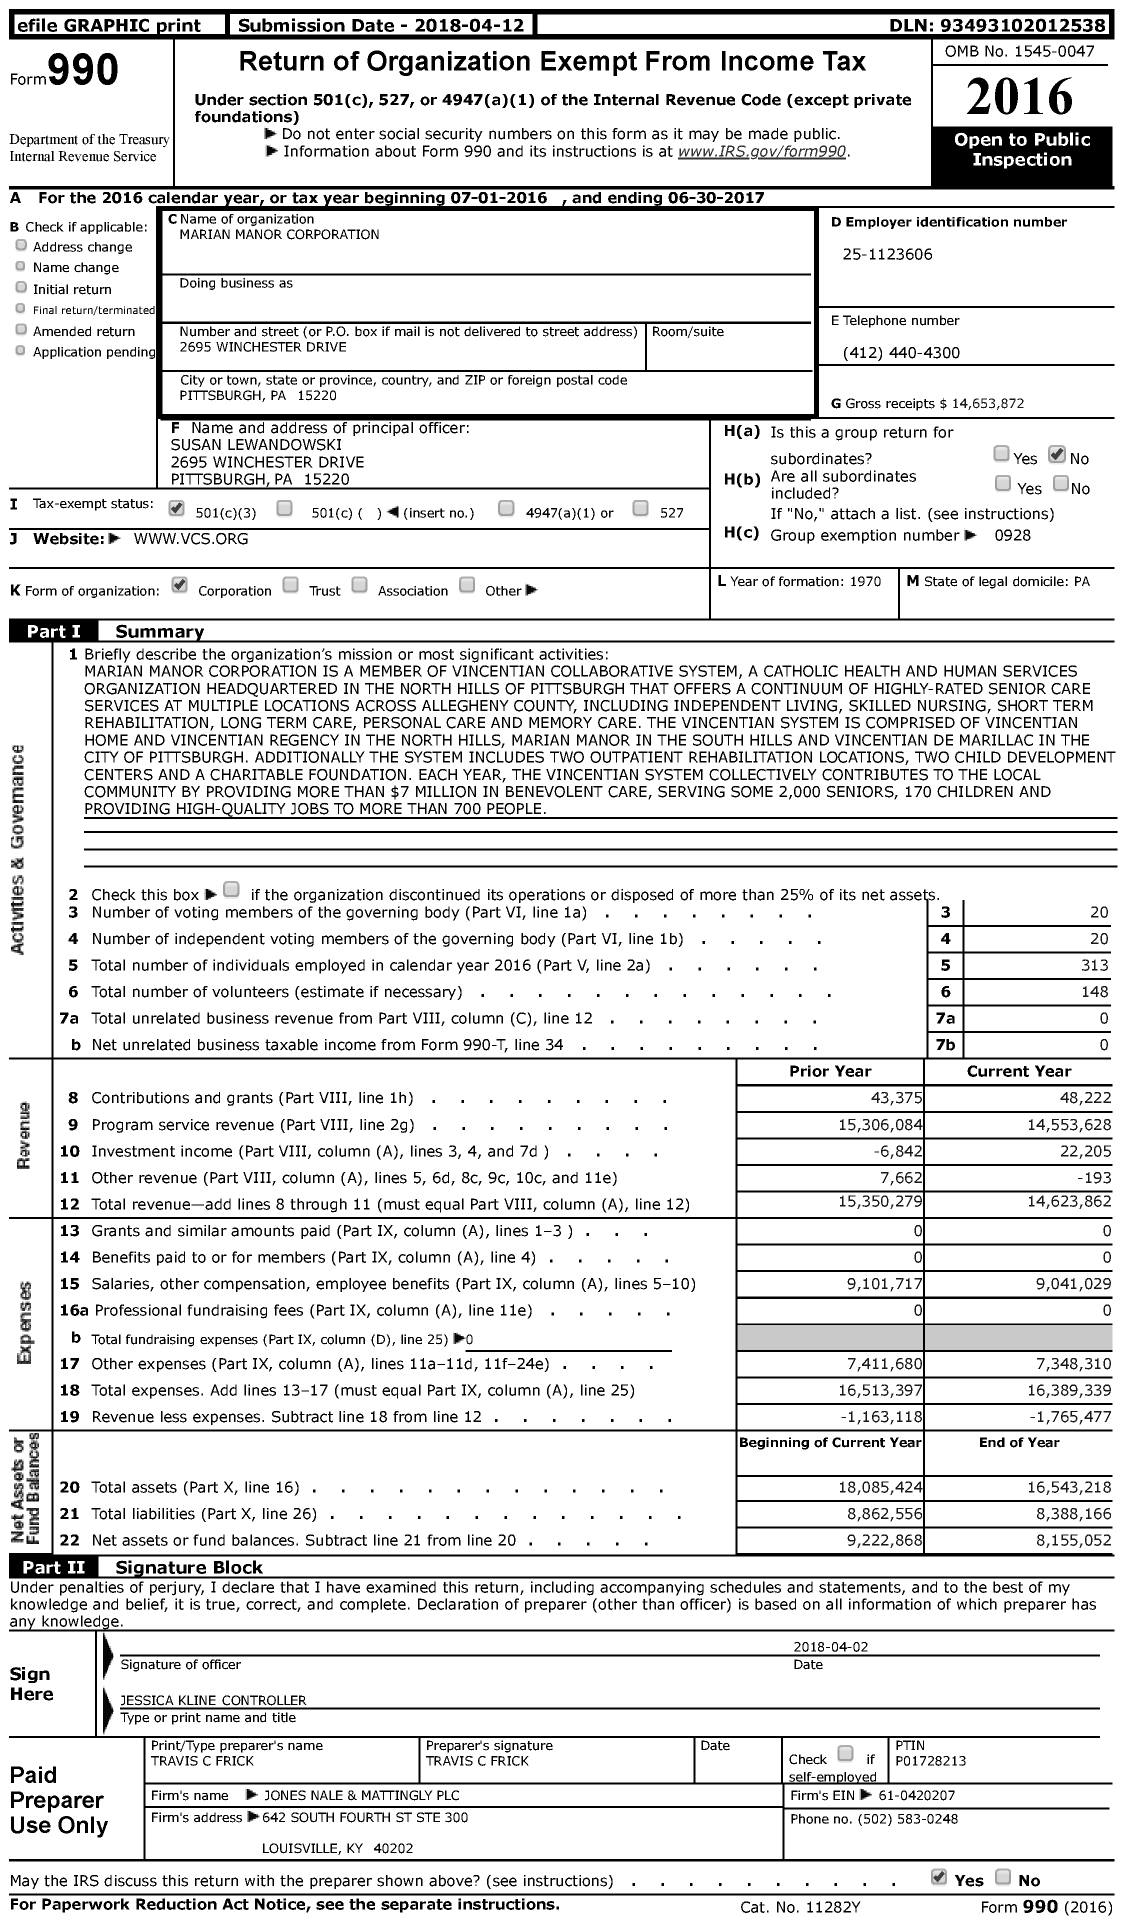 Image of first page of 2016 Form 990 for Marian Manor Corporation